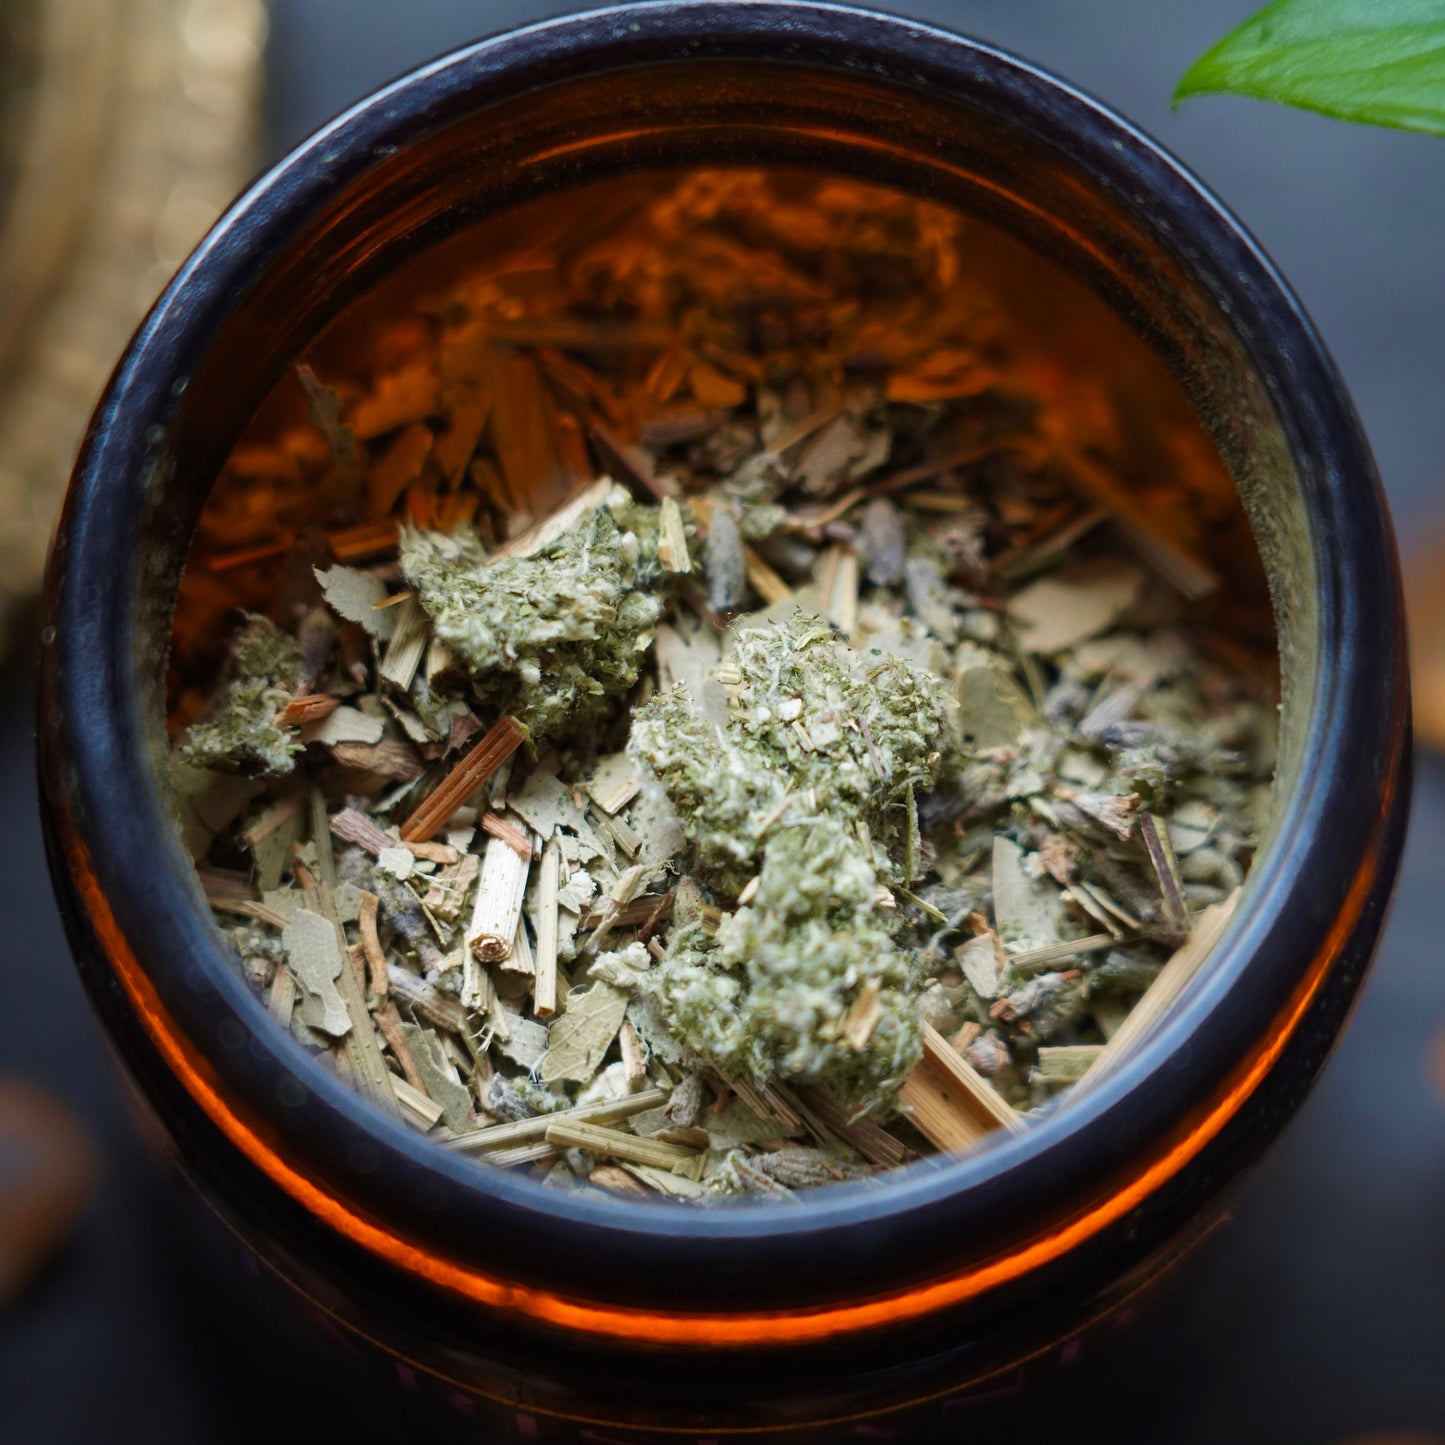 Herbs and tea in an amber jar, photographed in macro with a leaf and meditation bell in the background